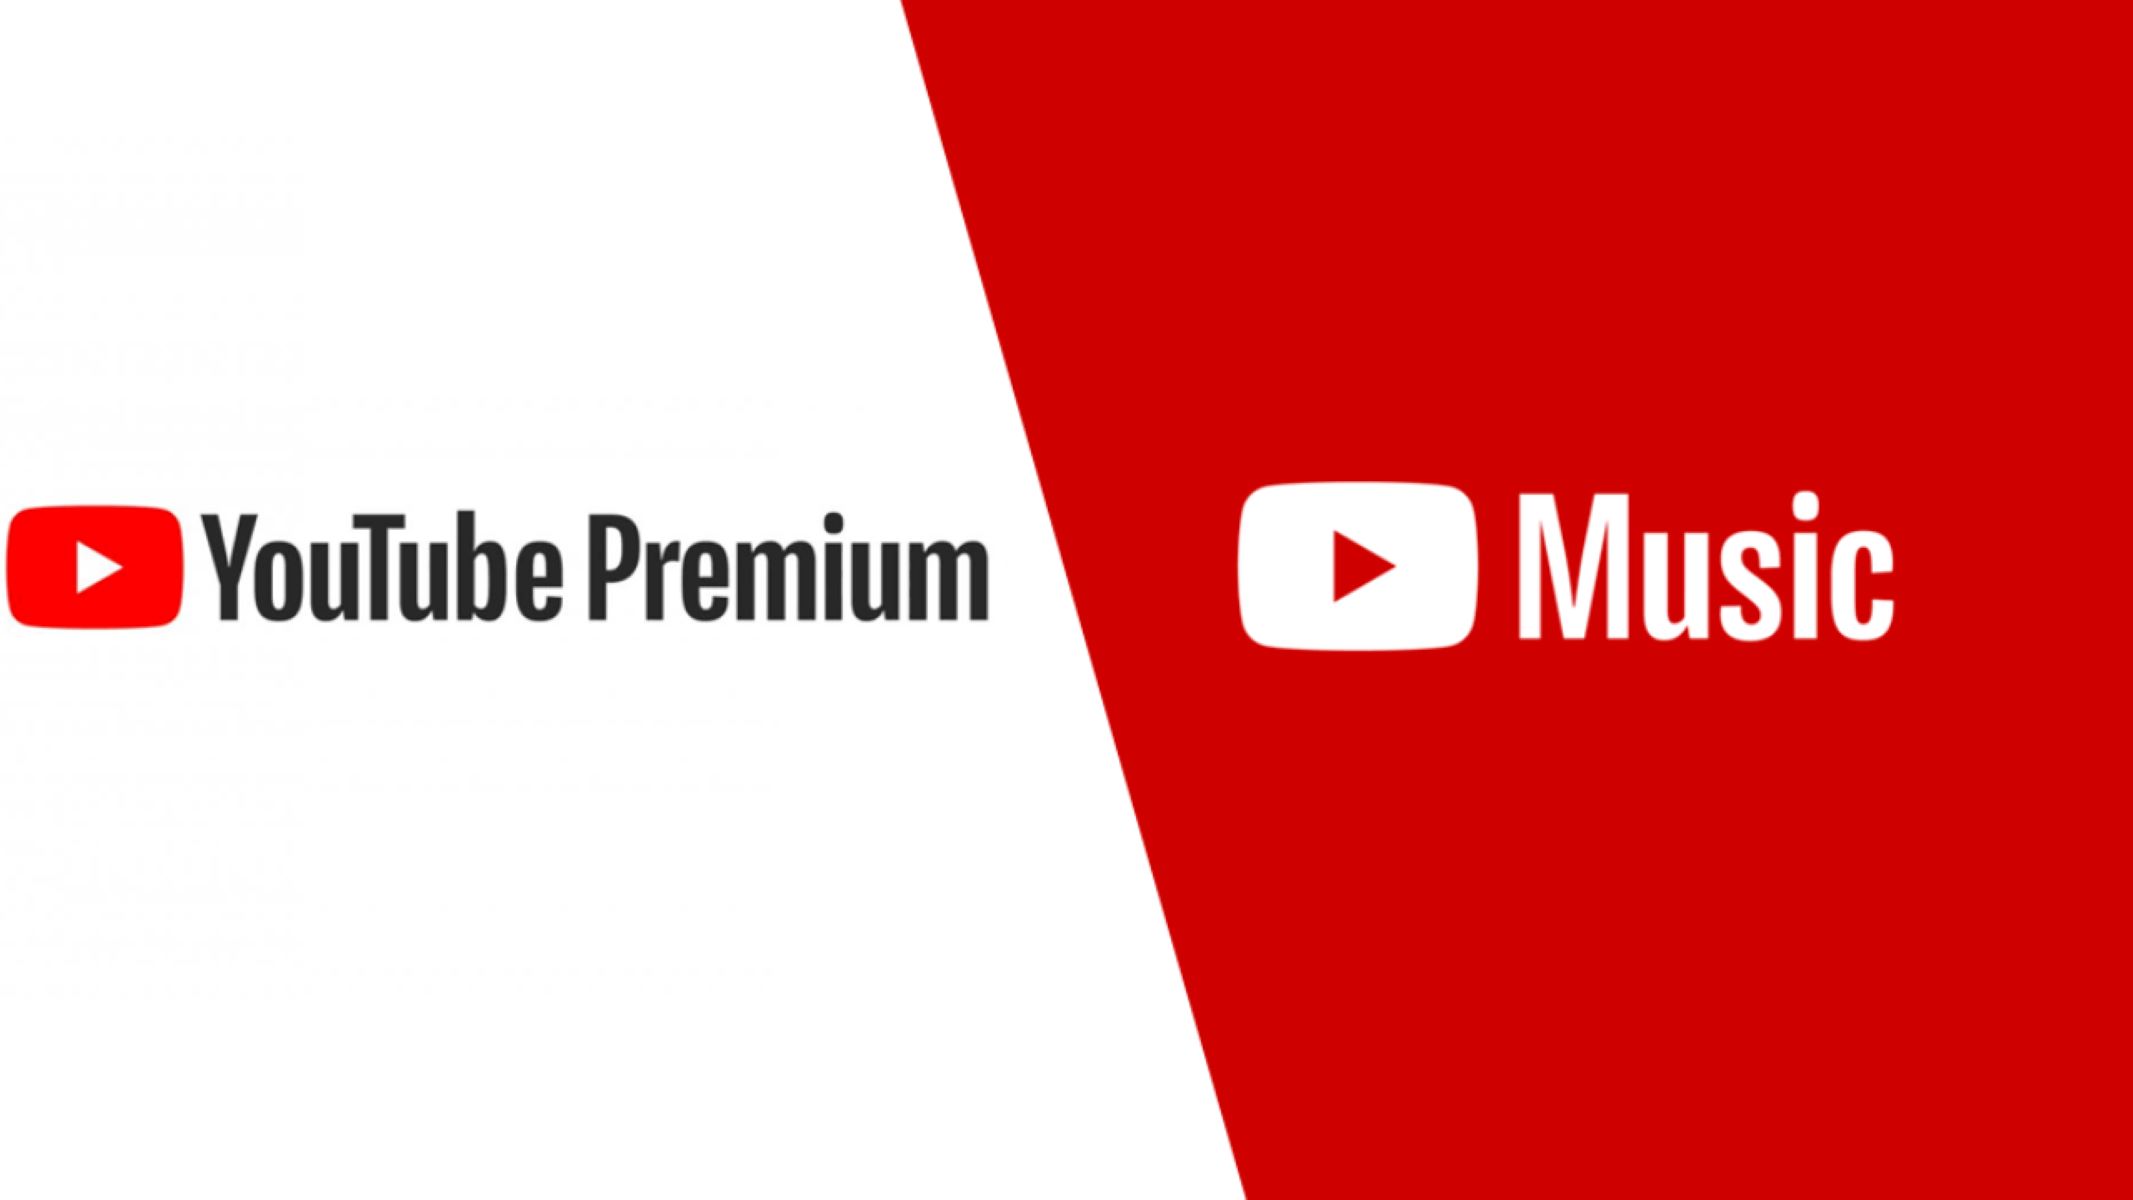 What Is The Difference Between Youtube Premium And Youtube Music